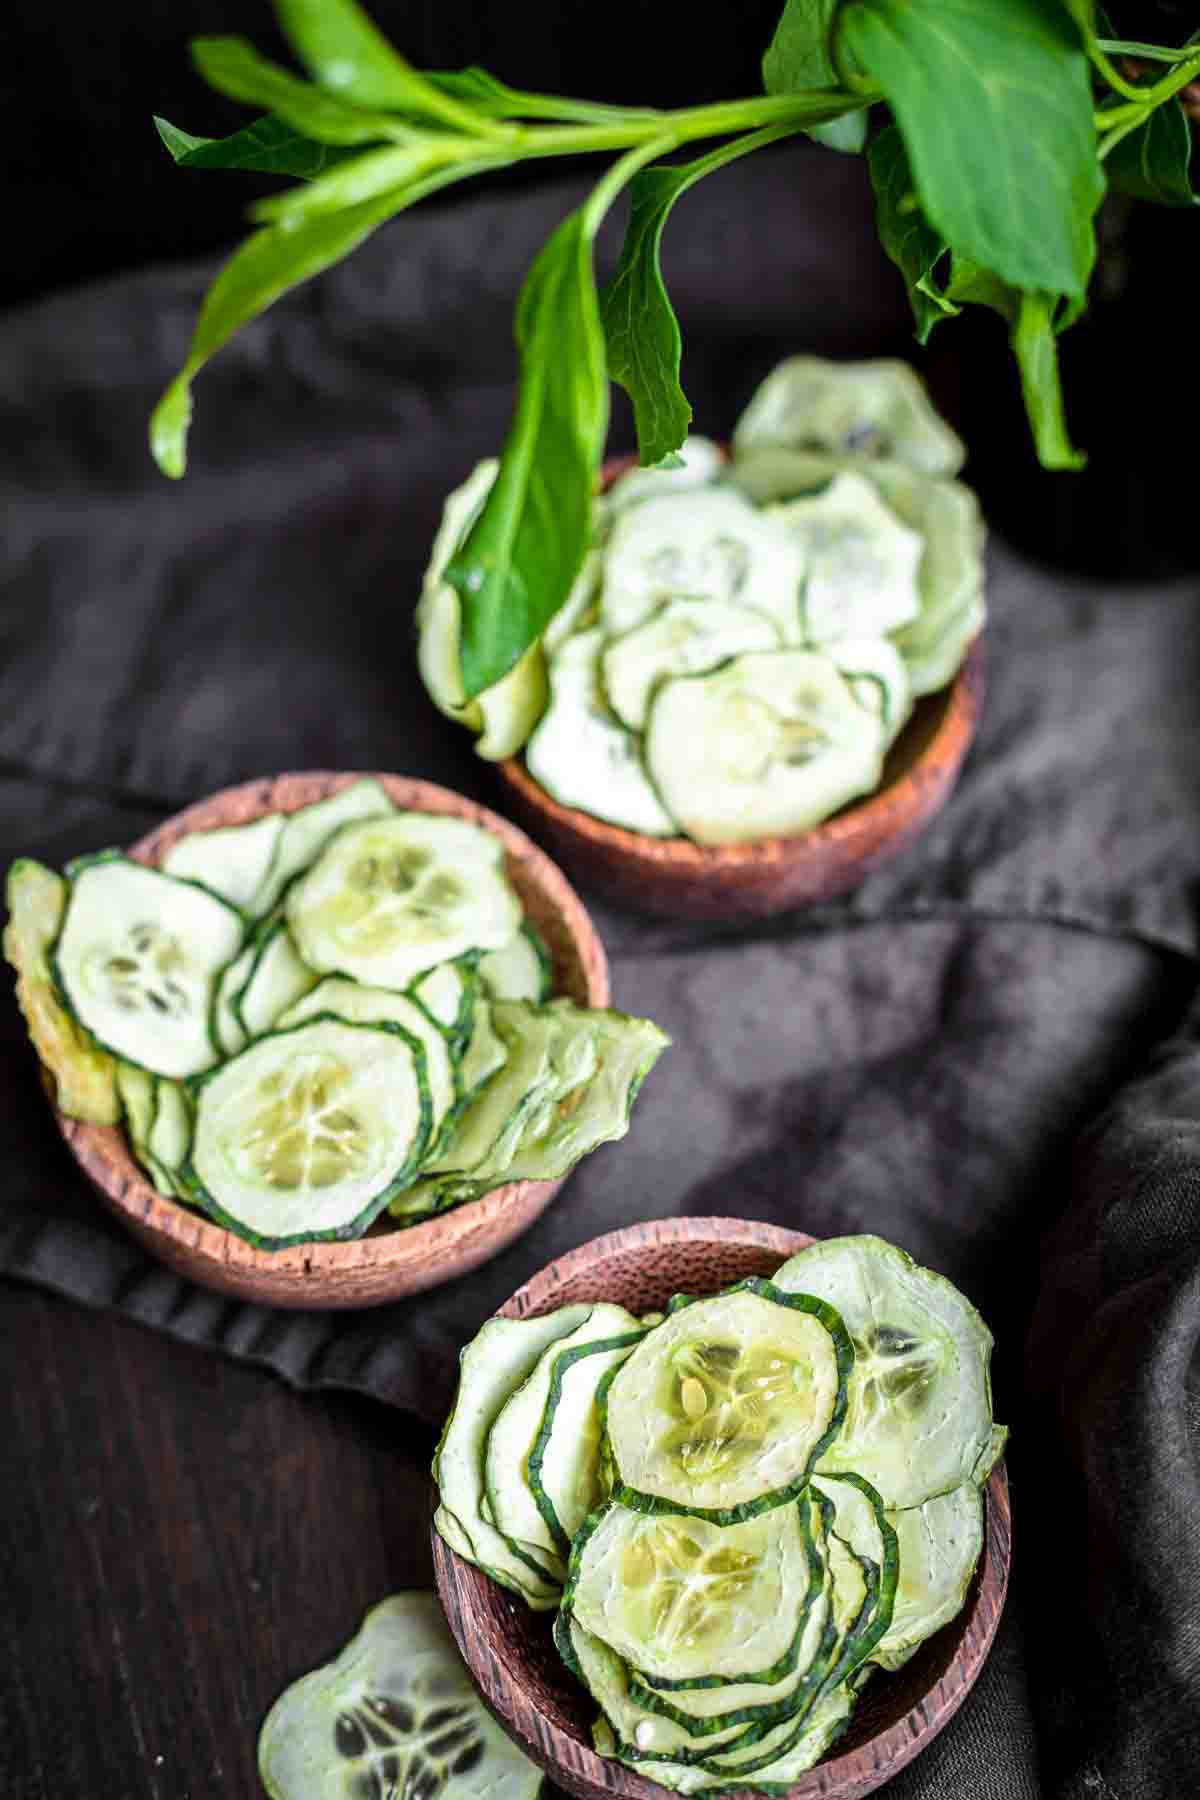 Cucumbers Snack inside wooden bowls.